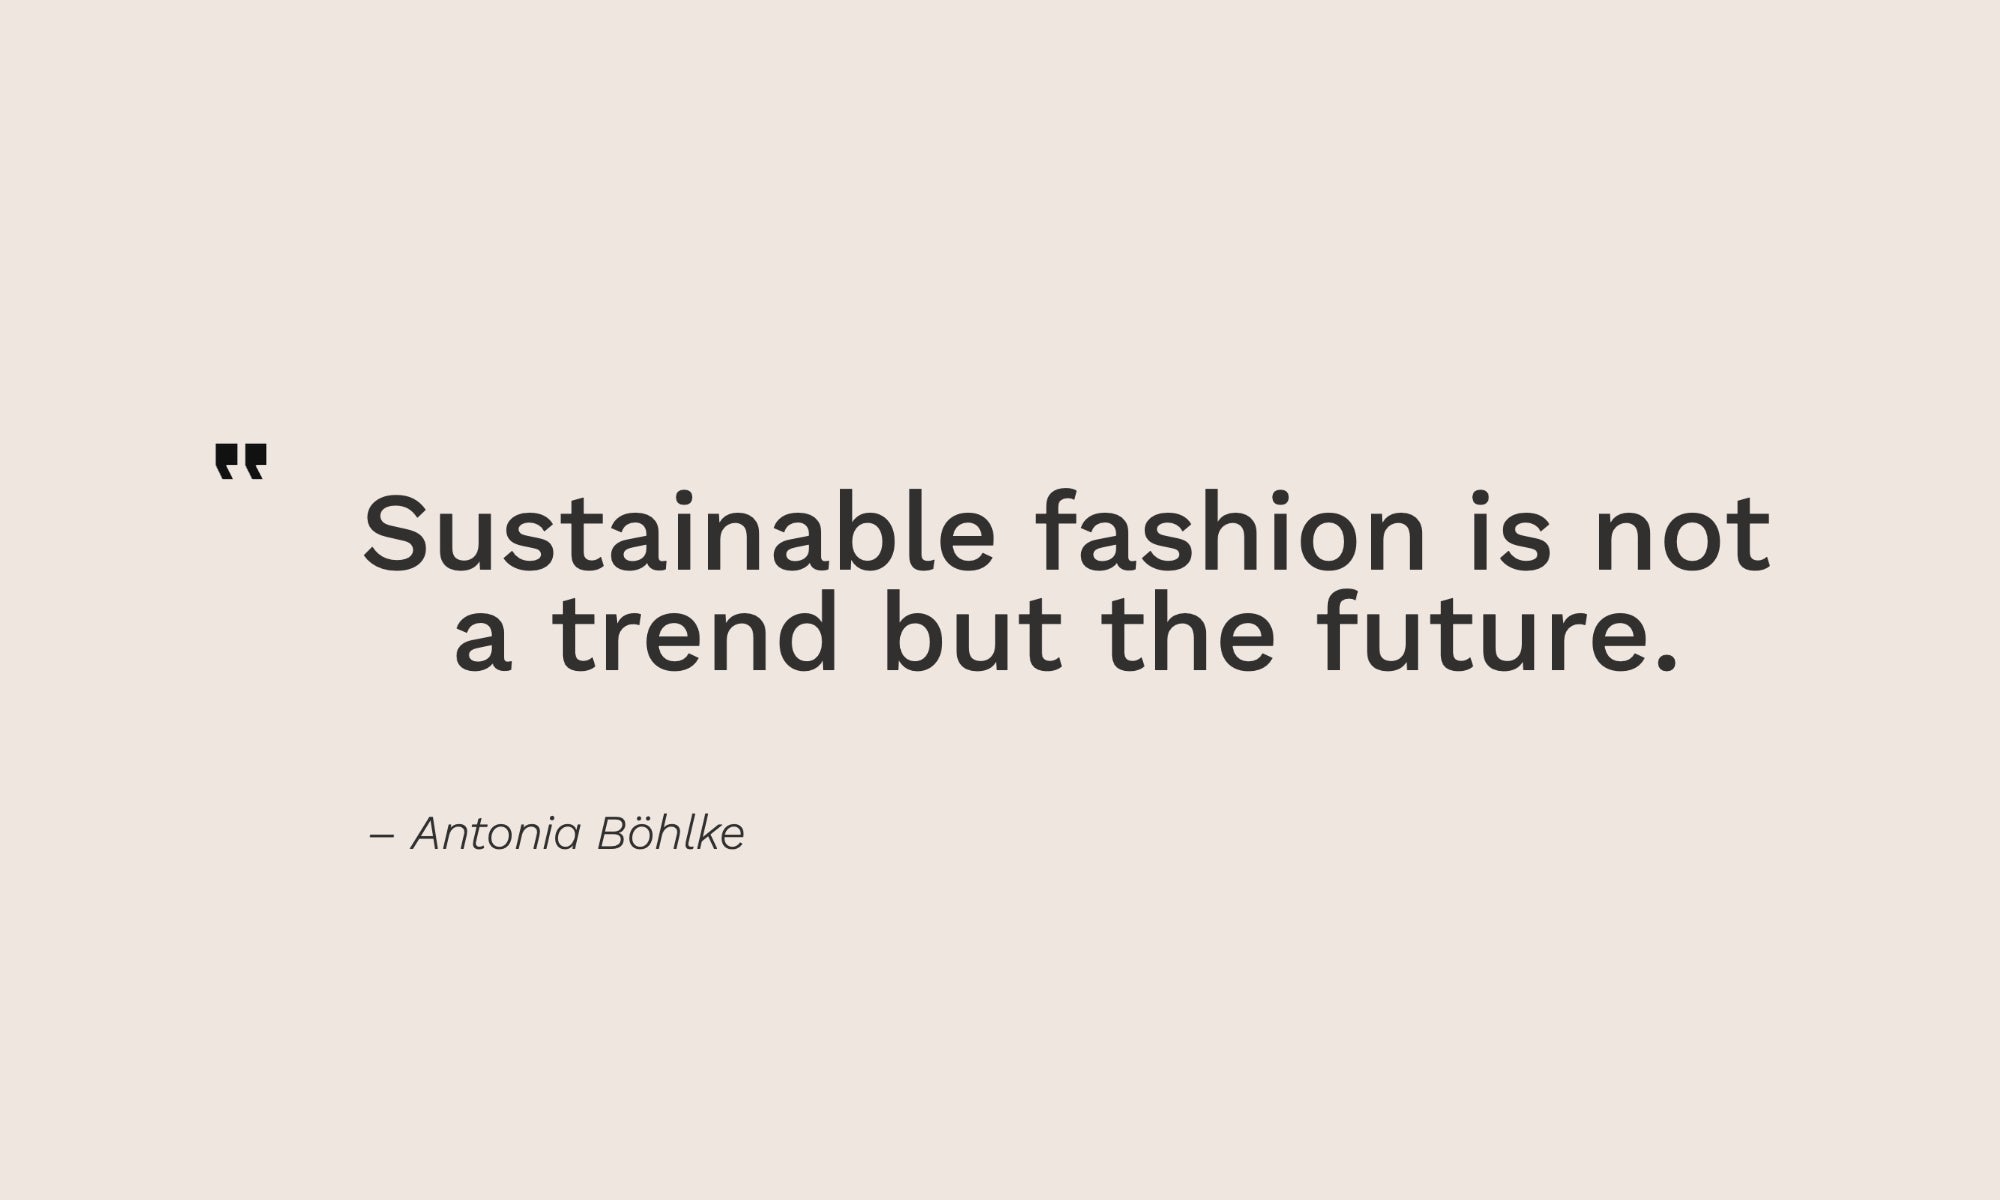 A quote about sustainable fashion by Antonia Bohlke